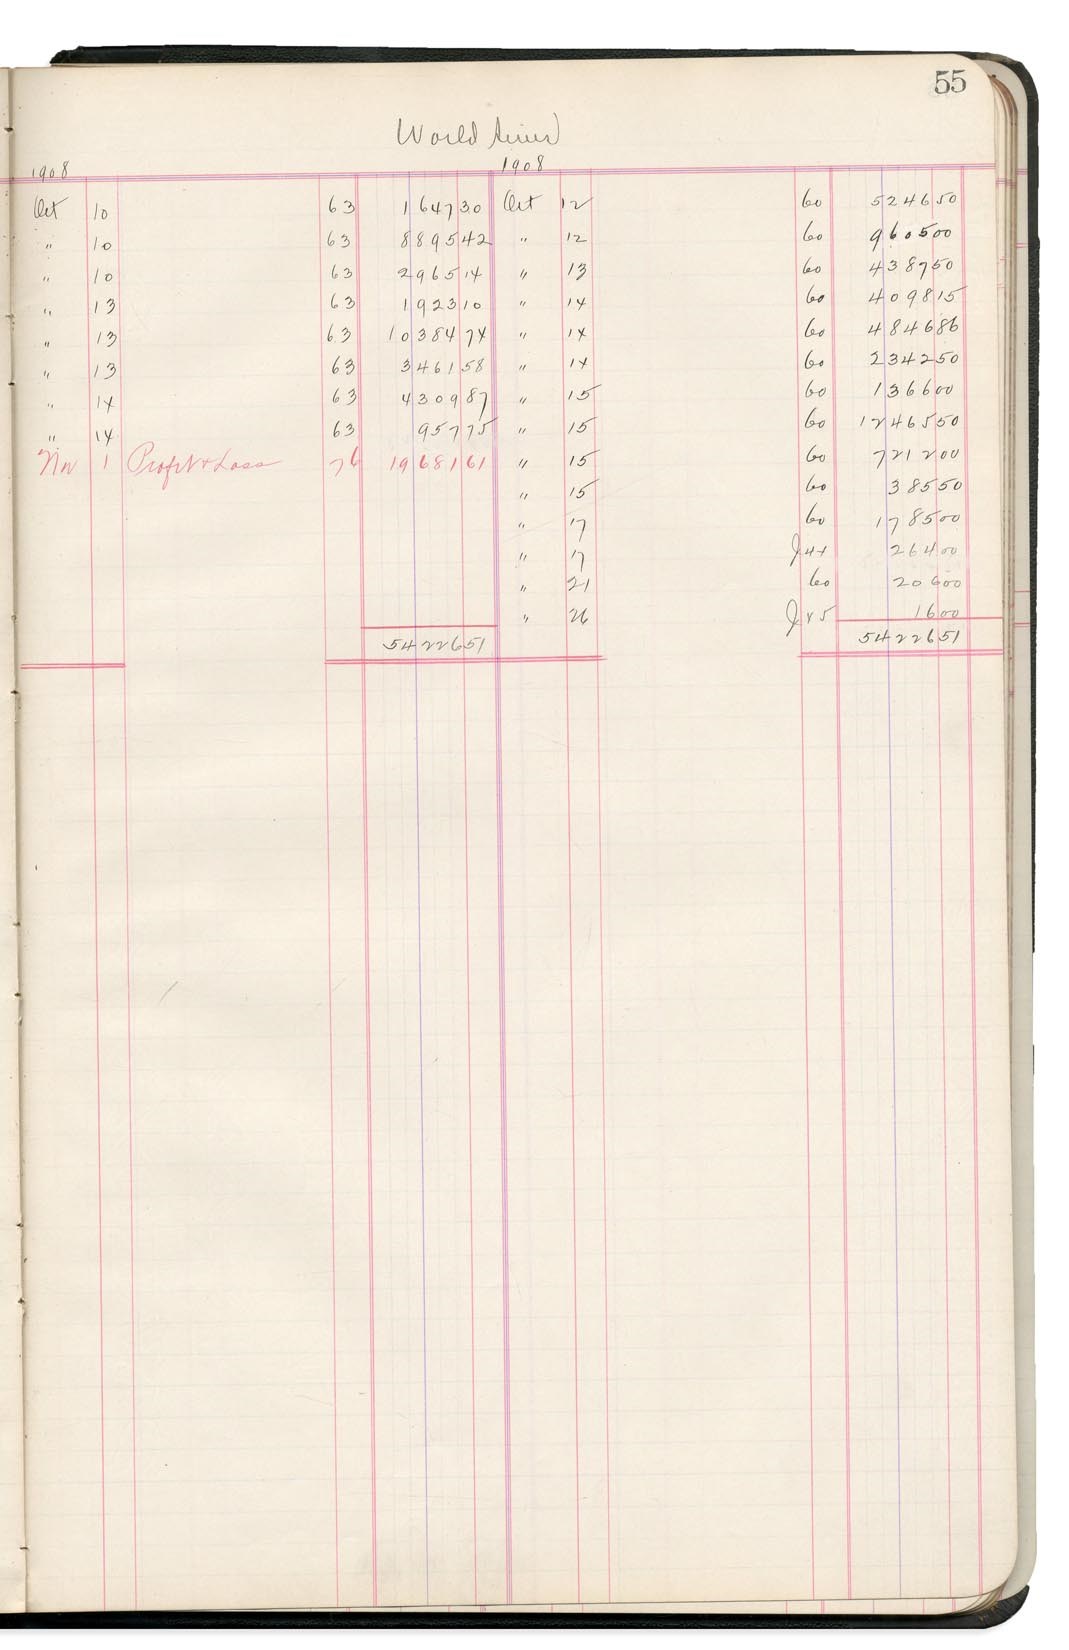 1908 A.L. Champion Detroit Tigers Financial Ledger Written in the Hand of Owner Frank Navin